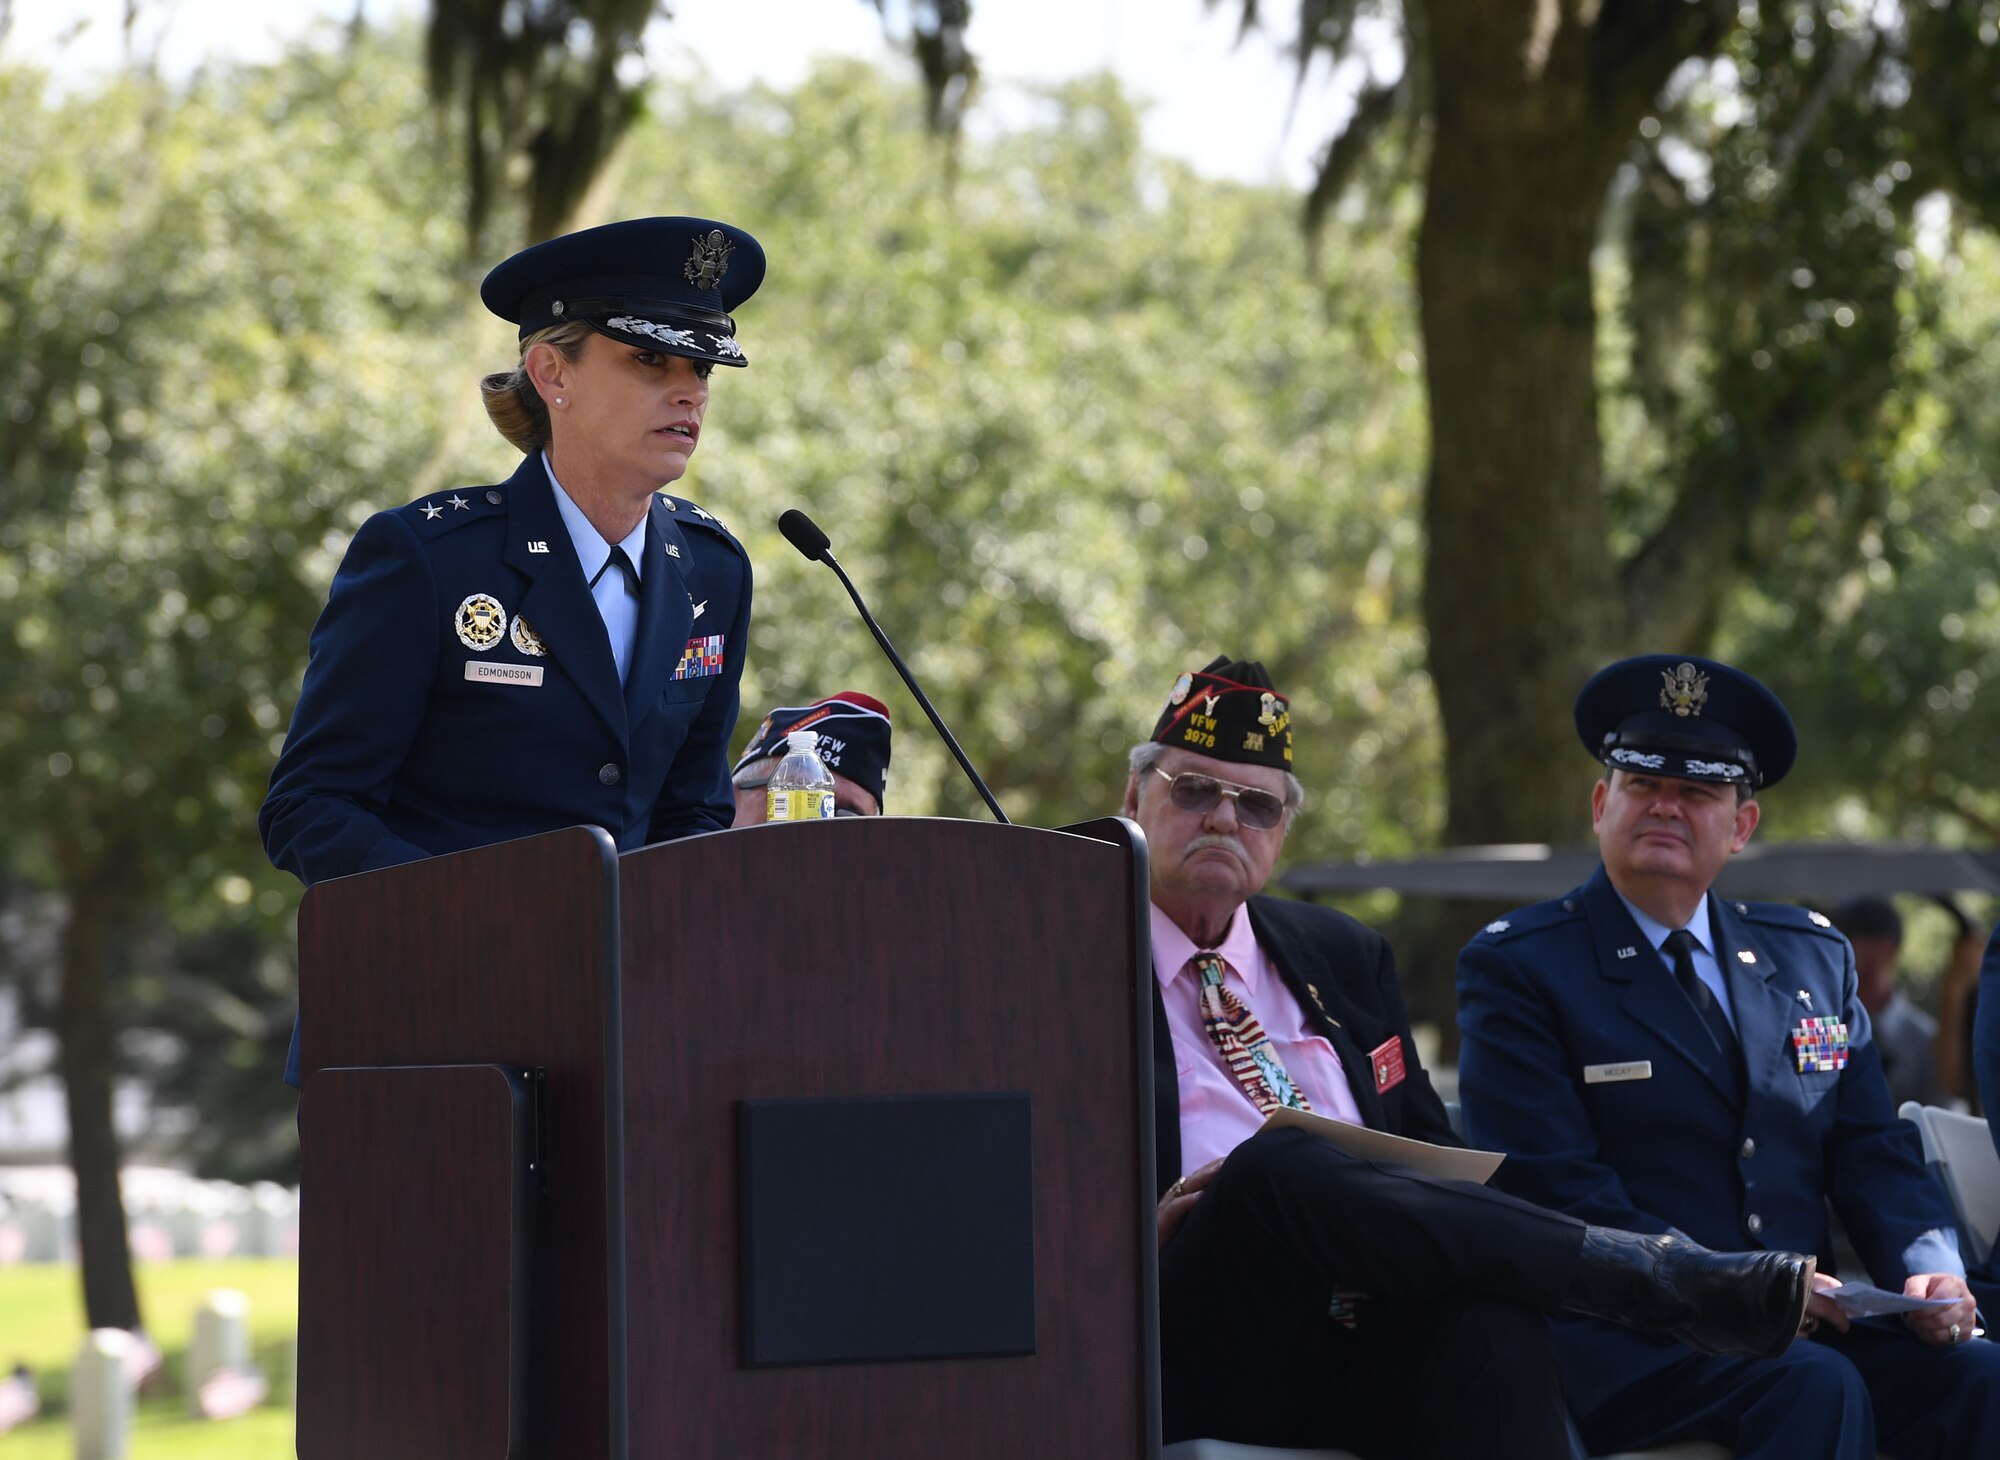 U.S. Air Force Maj. Gen. Michele Edmondson, Second Air Force commander, delivers remarks during the Biloxi National Cemetery Memorial Day Ceremony in Biloxi, Mississippi, May 30, 2022. The ceremony honored those who have made the ultimate sacrifice while serving in the armed forces. Biloxi National Cemetery is the final resting place of more than 23,000 veterans and their family members. Every year, 800 burials take place there for men and women who served in wars years ago and for those defending America today. (U.S. Air Force photo by Kemberly Groue)